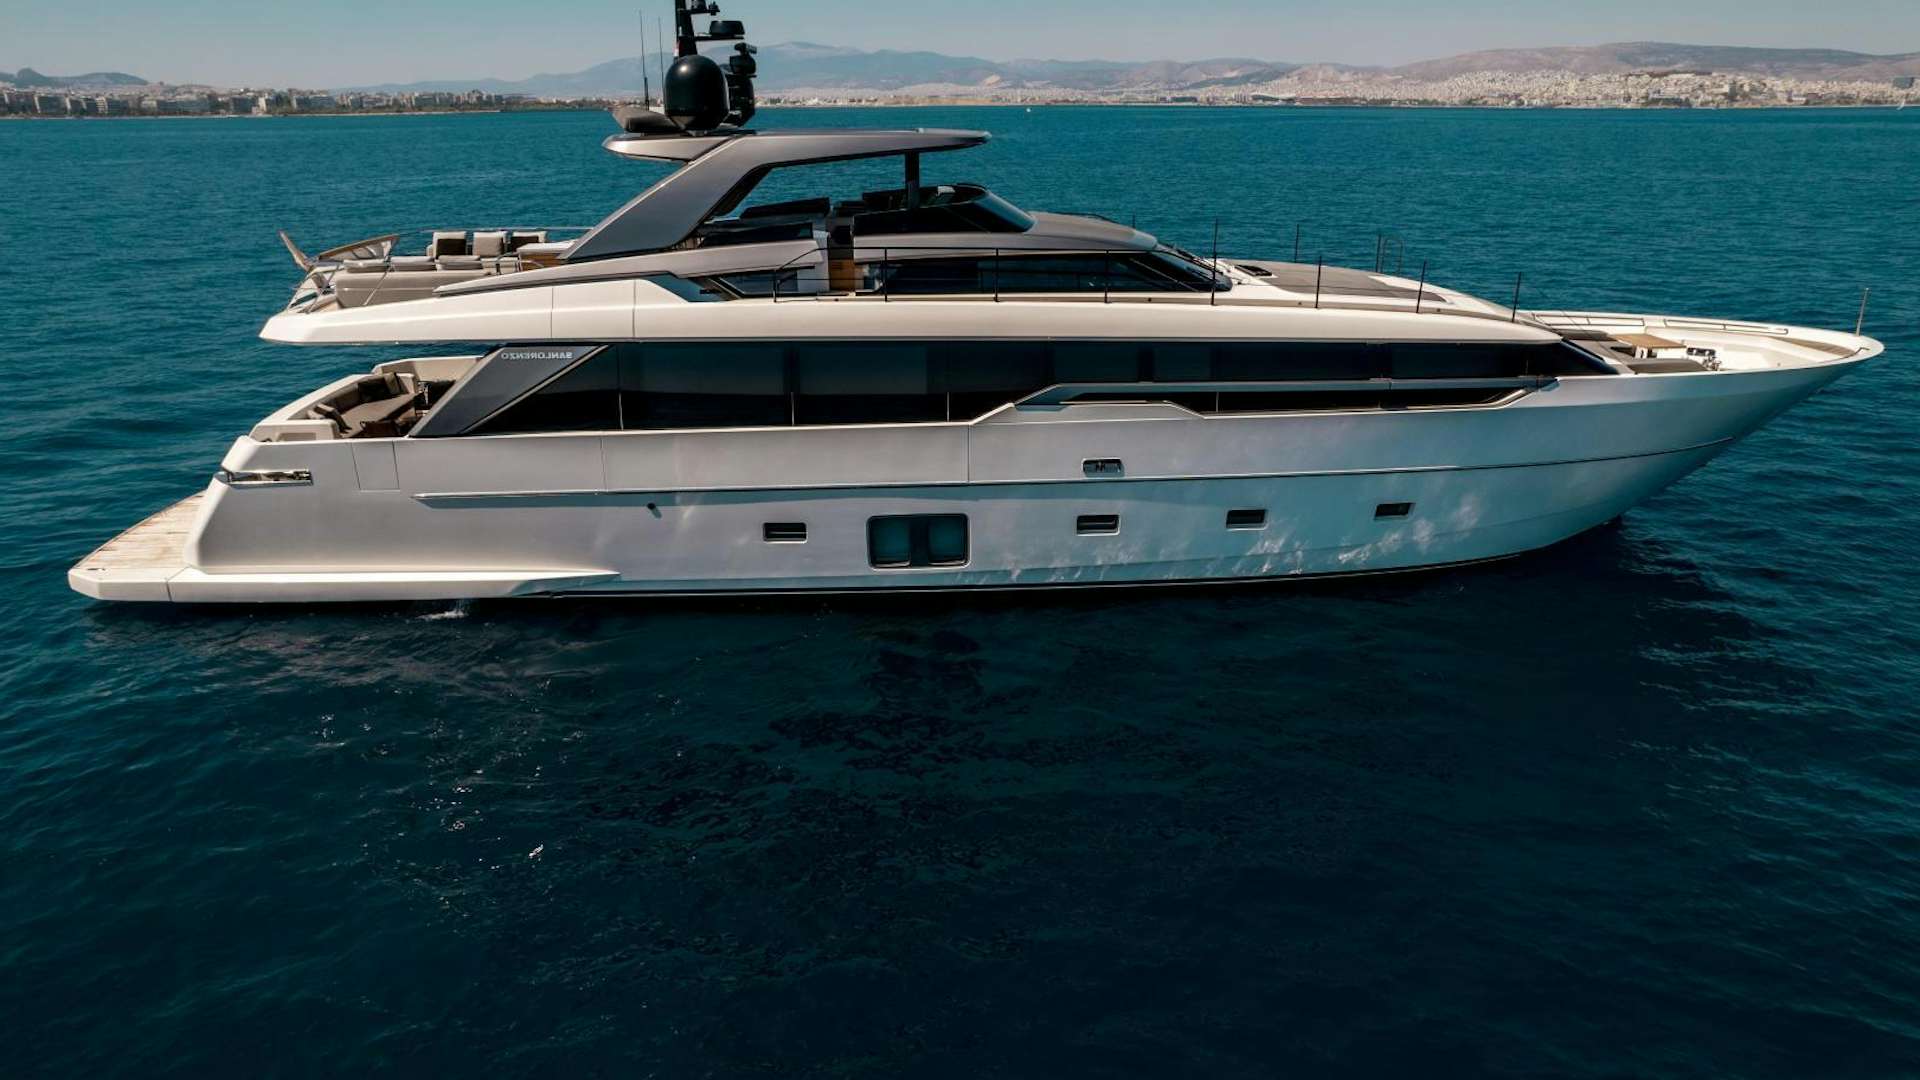 Watch Video for ACE Yacht for Sale